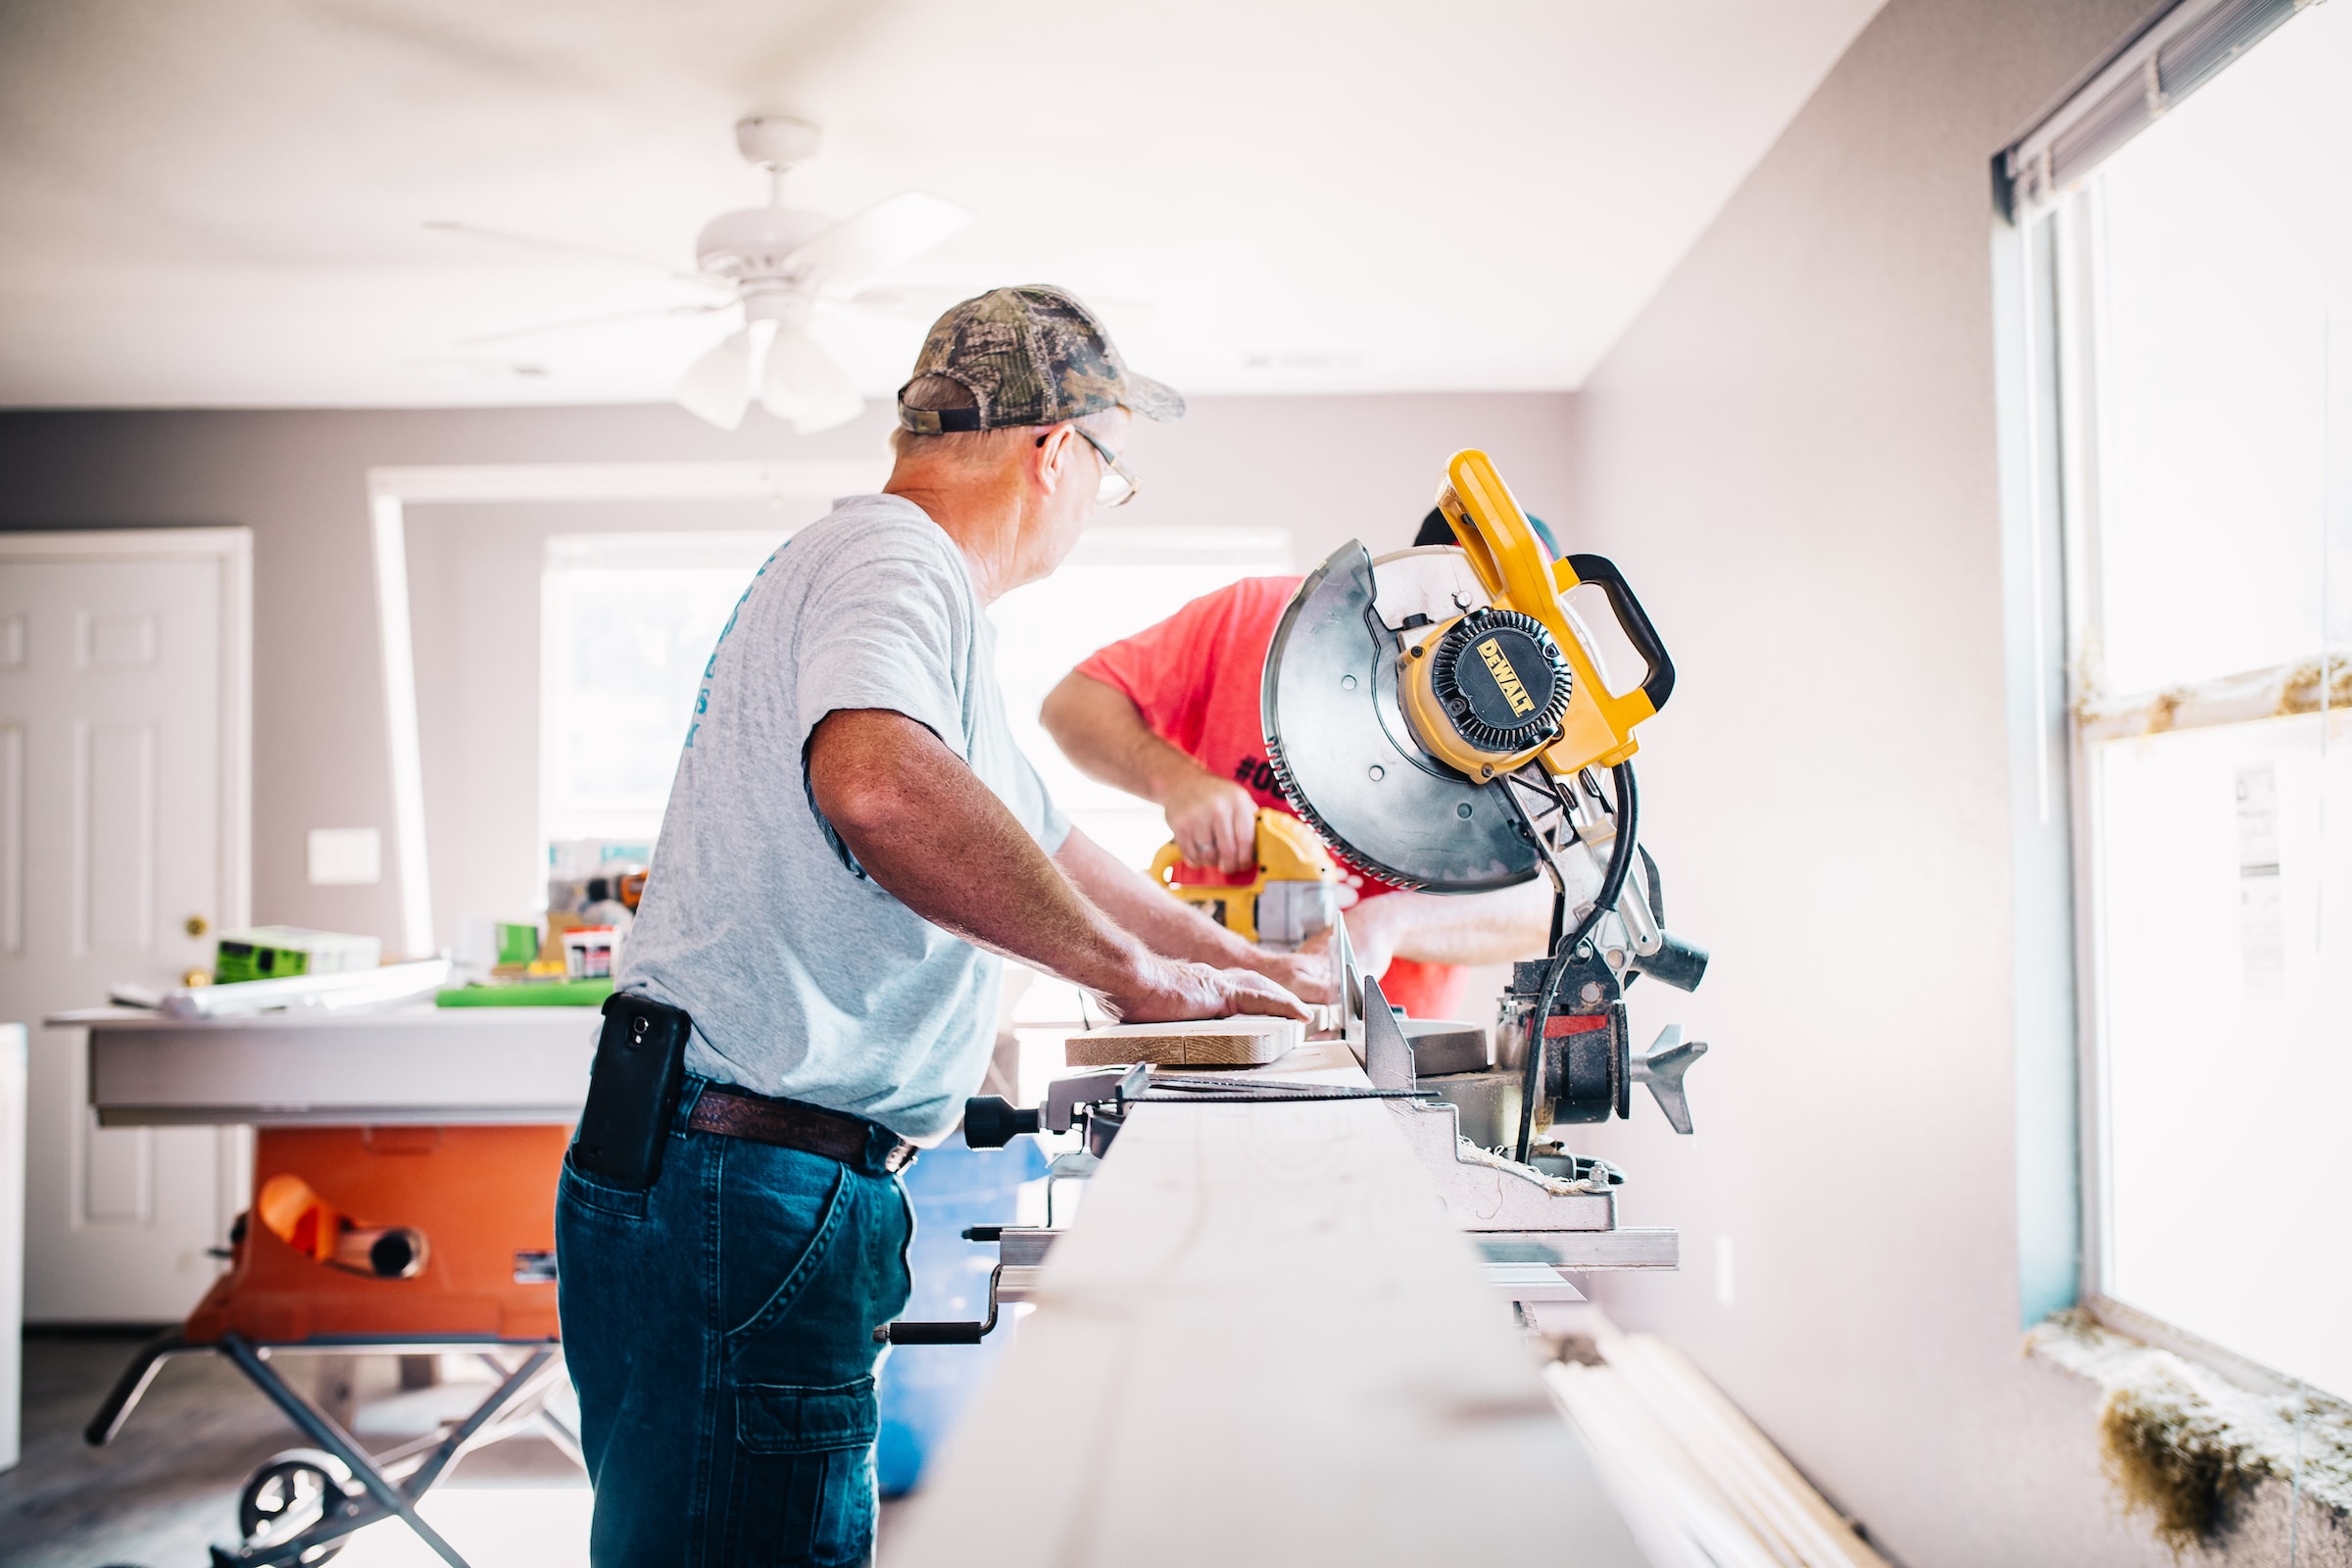 4 Easy Steps to Market your Handyman Services Online 